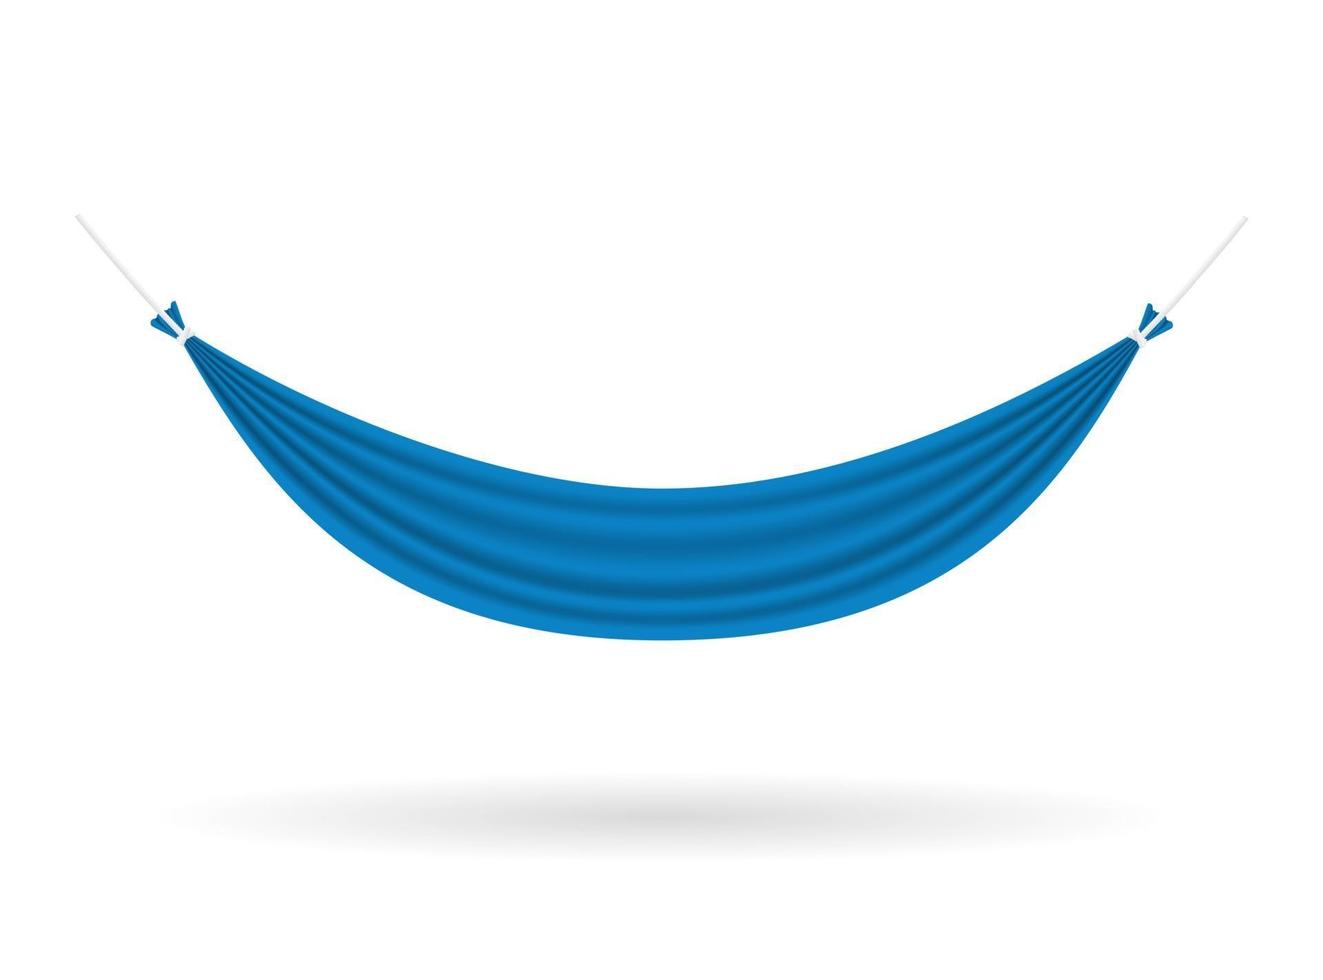 hammock hanging cloth for rest stock vector illustration isolated on white background